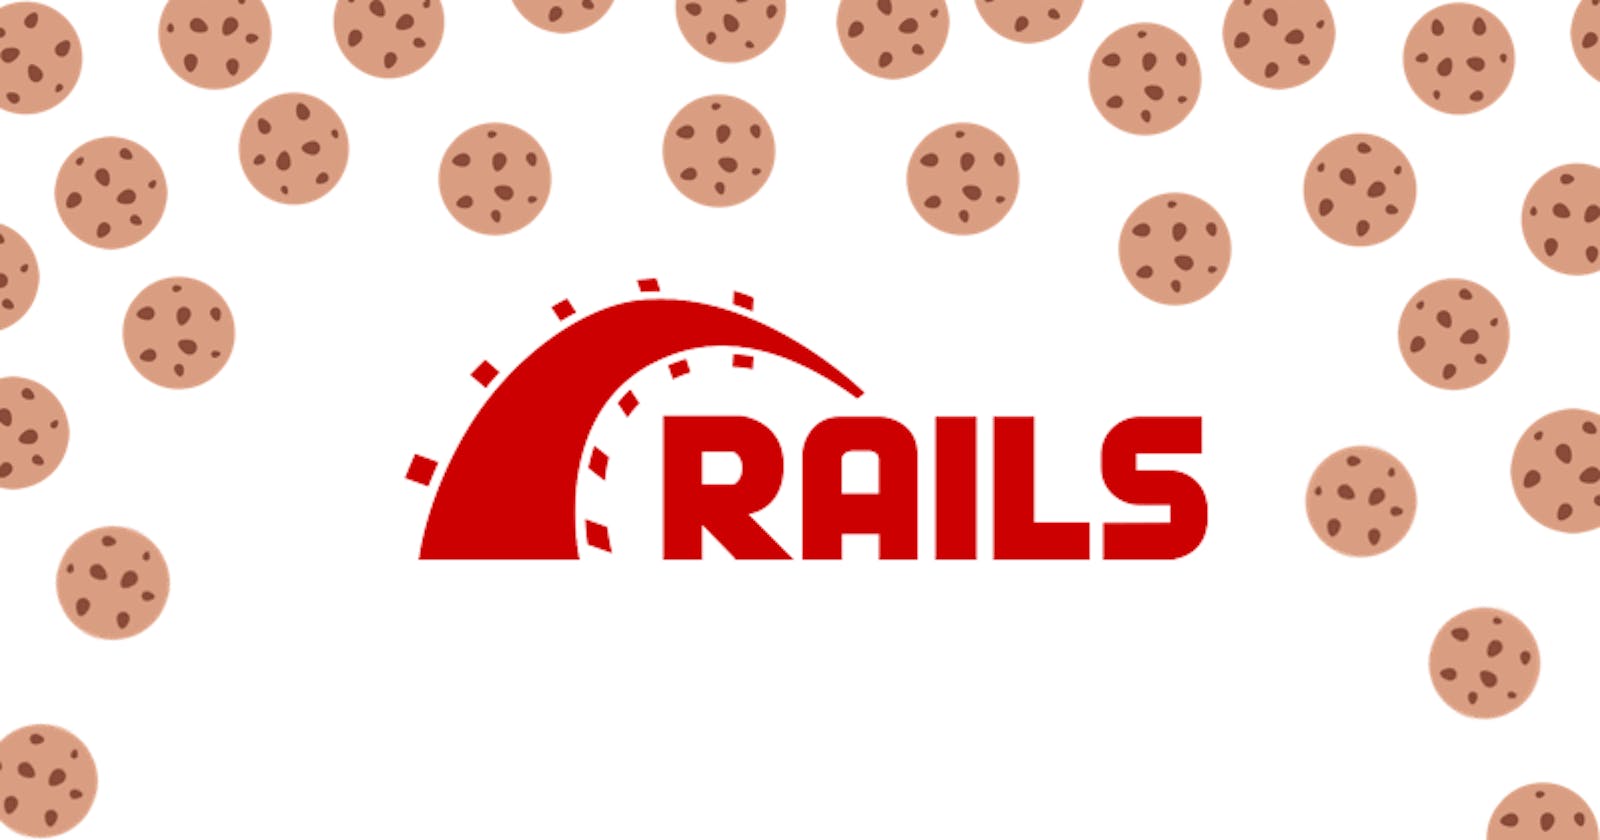 Testing signed and encrypted cookies in Rails